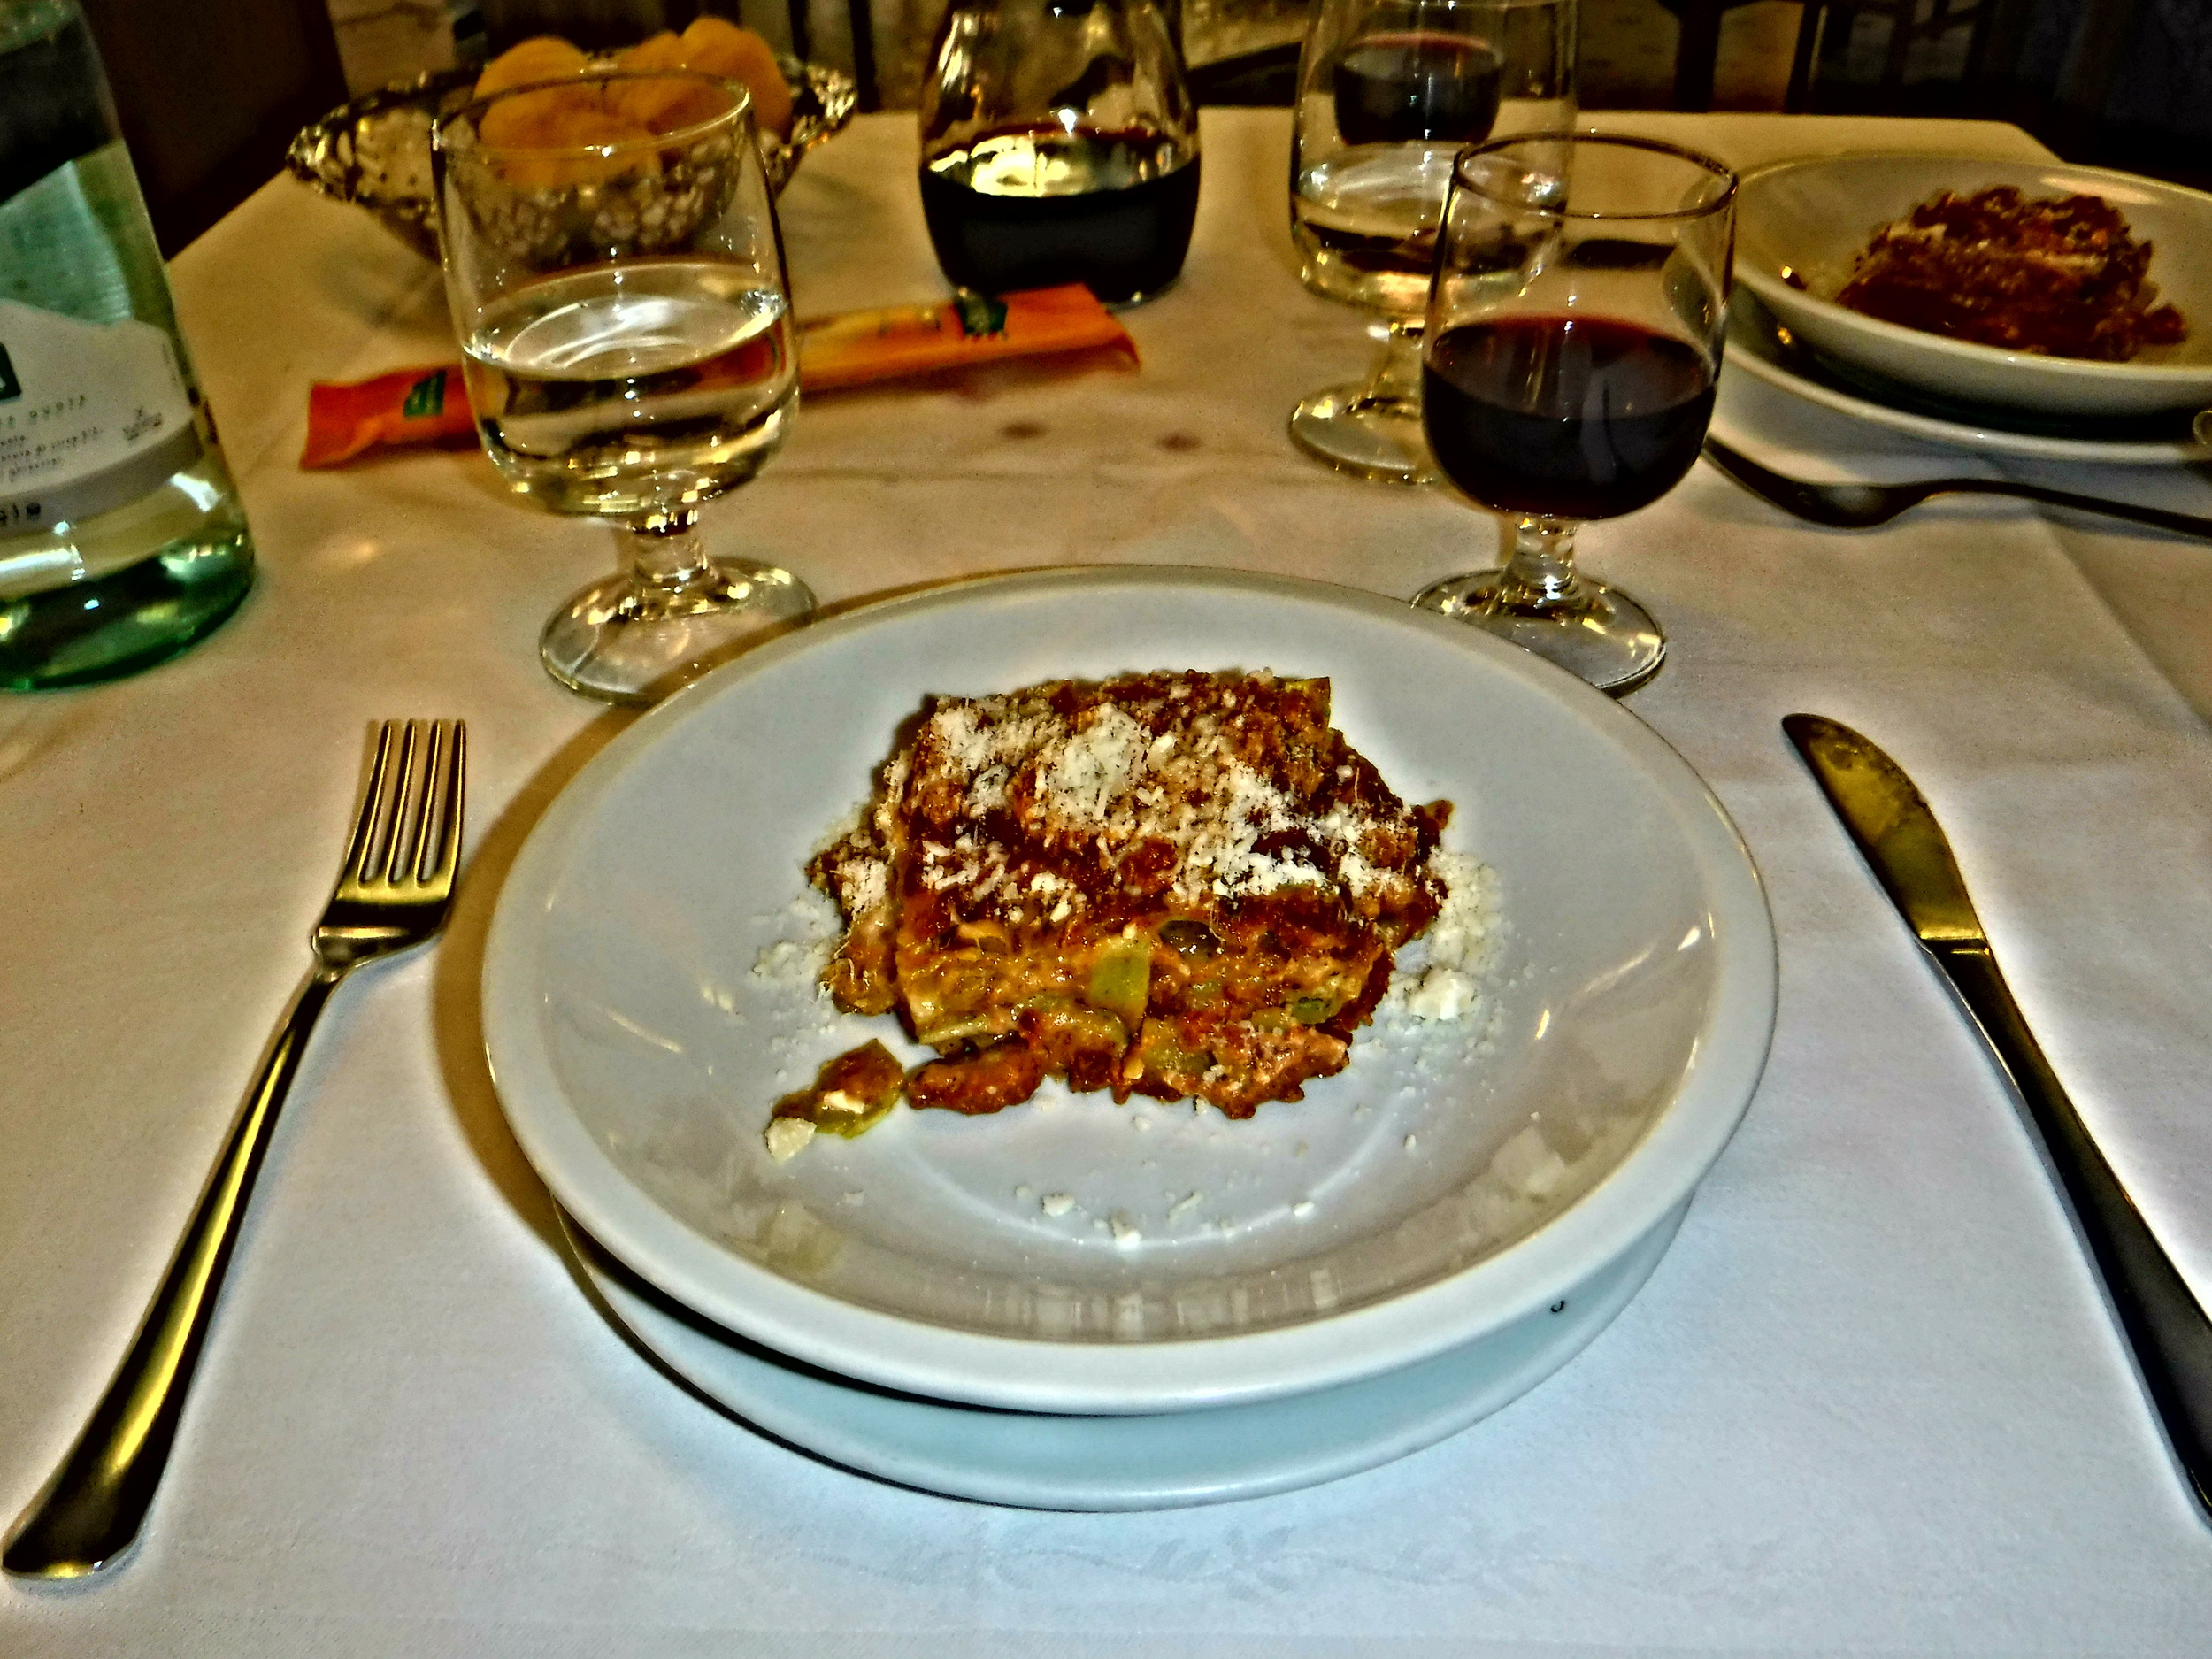 7. 1st course of delicate lasagne verdi-spinach flavored pasta with meat ragout & béchamel sauce.JPG